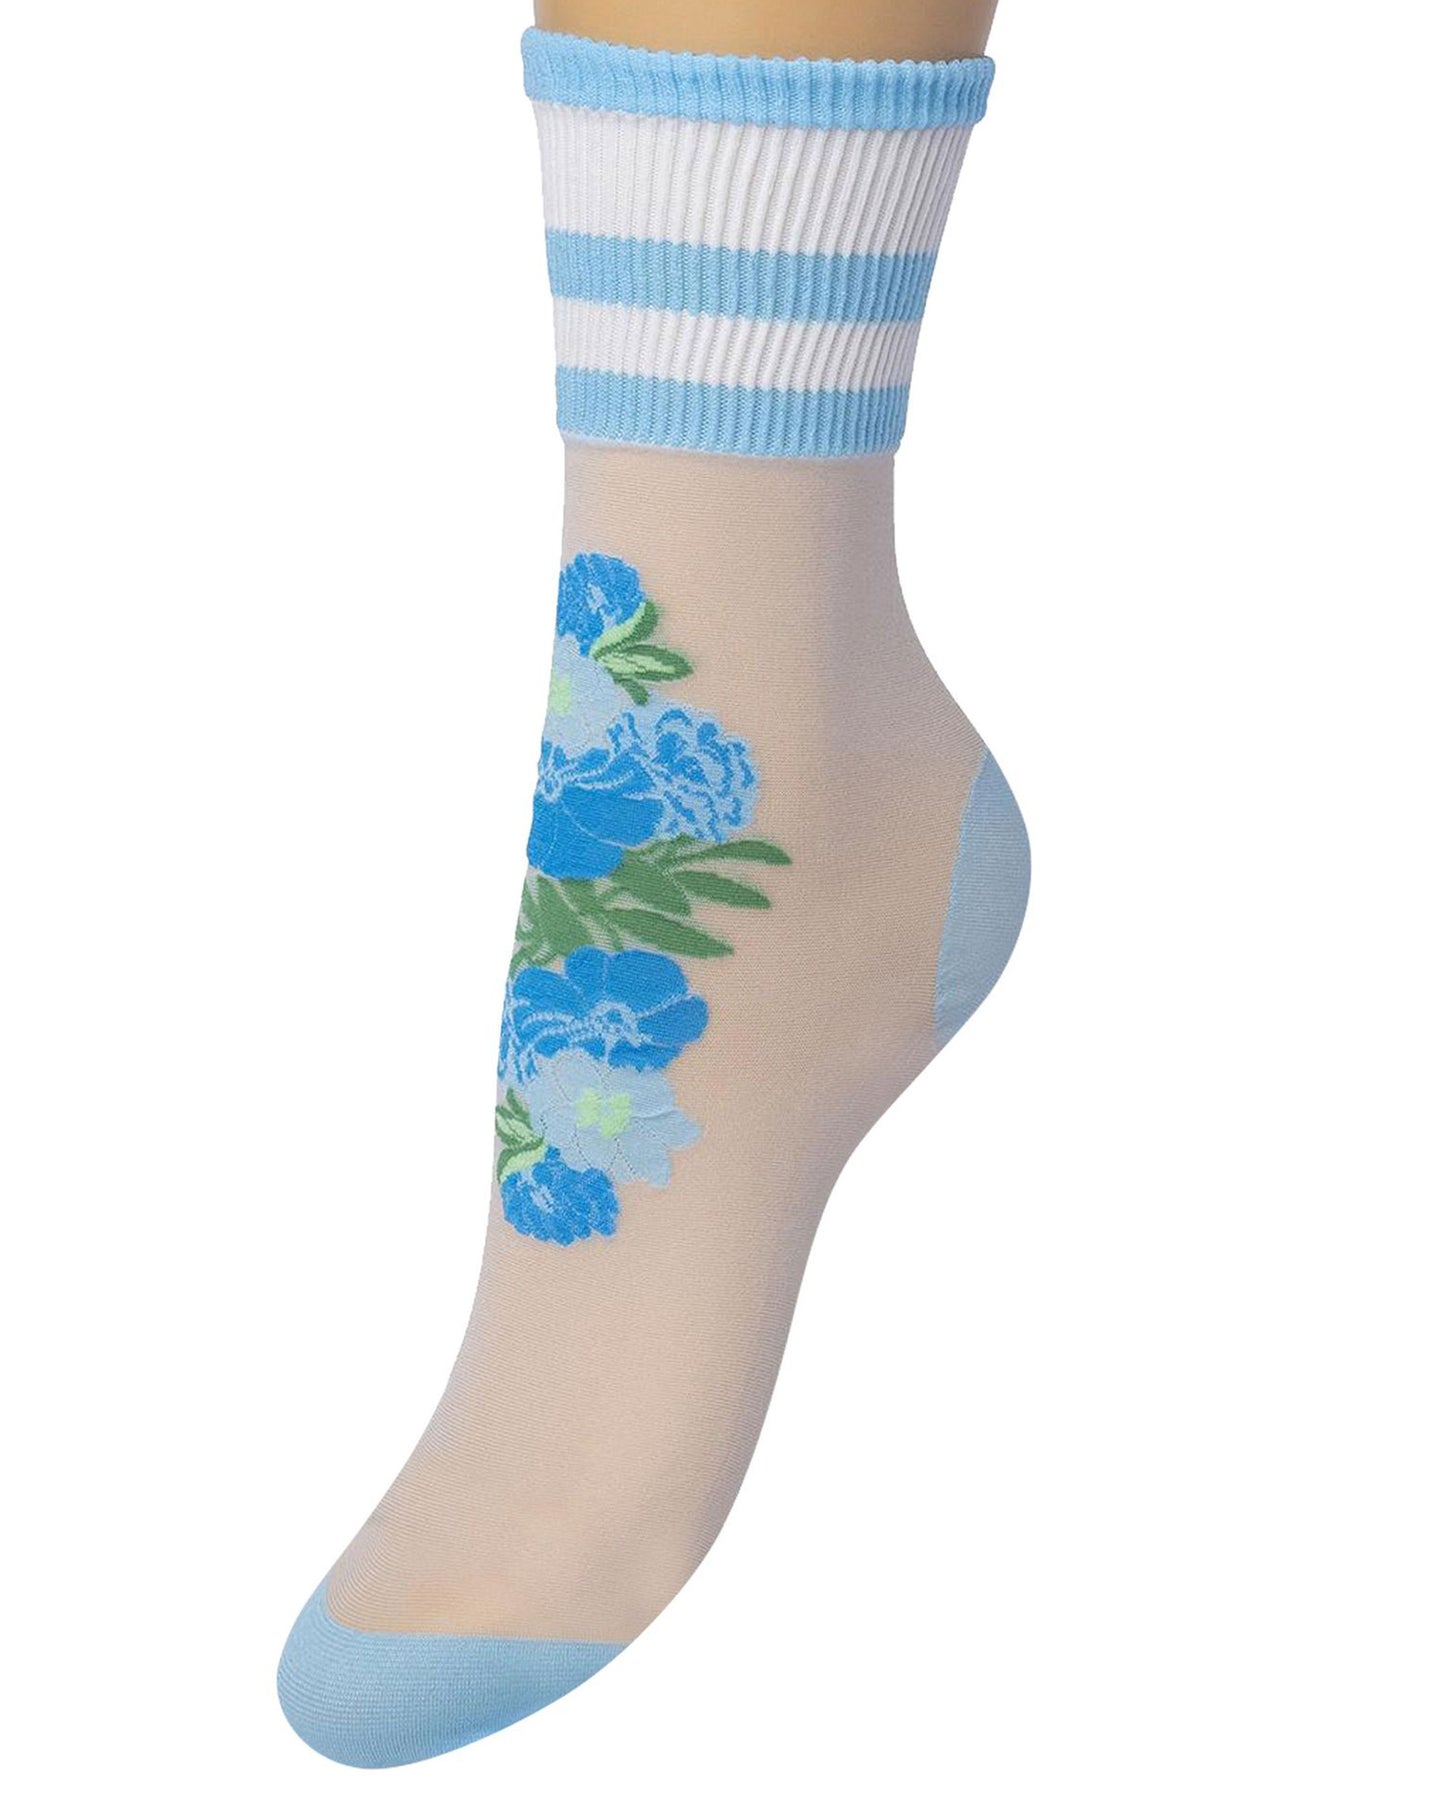 Bonnie Doon Sporty Flower Sock - sheer white fashion ankle socks with a woven floral motif in shades of green and blue and deep white elasticated cuff with three light blue sports style stripes.